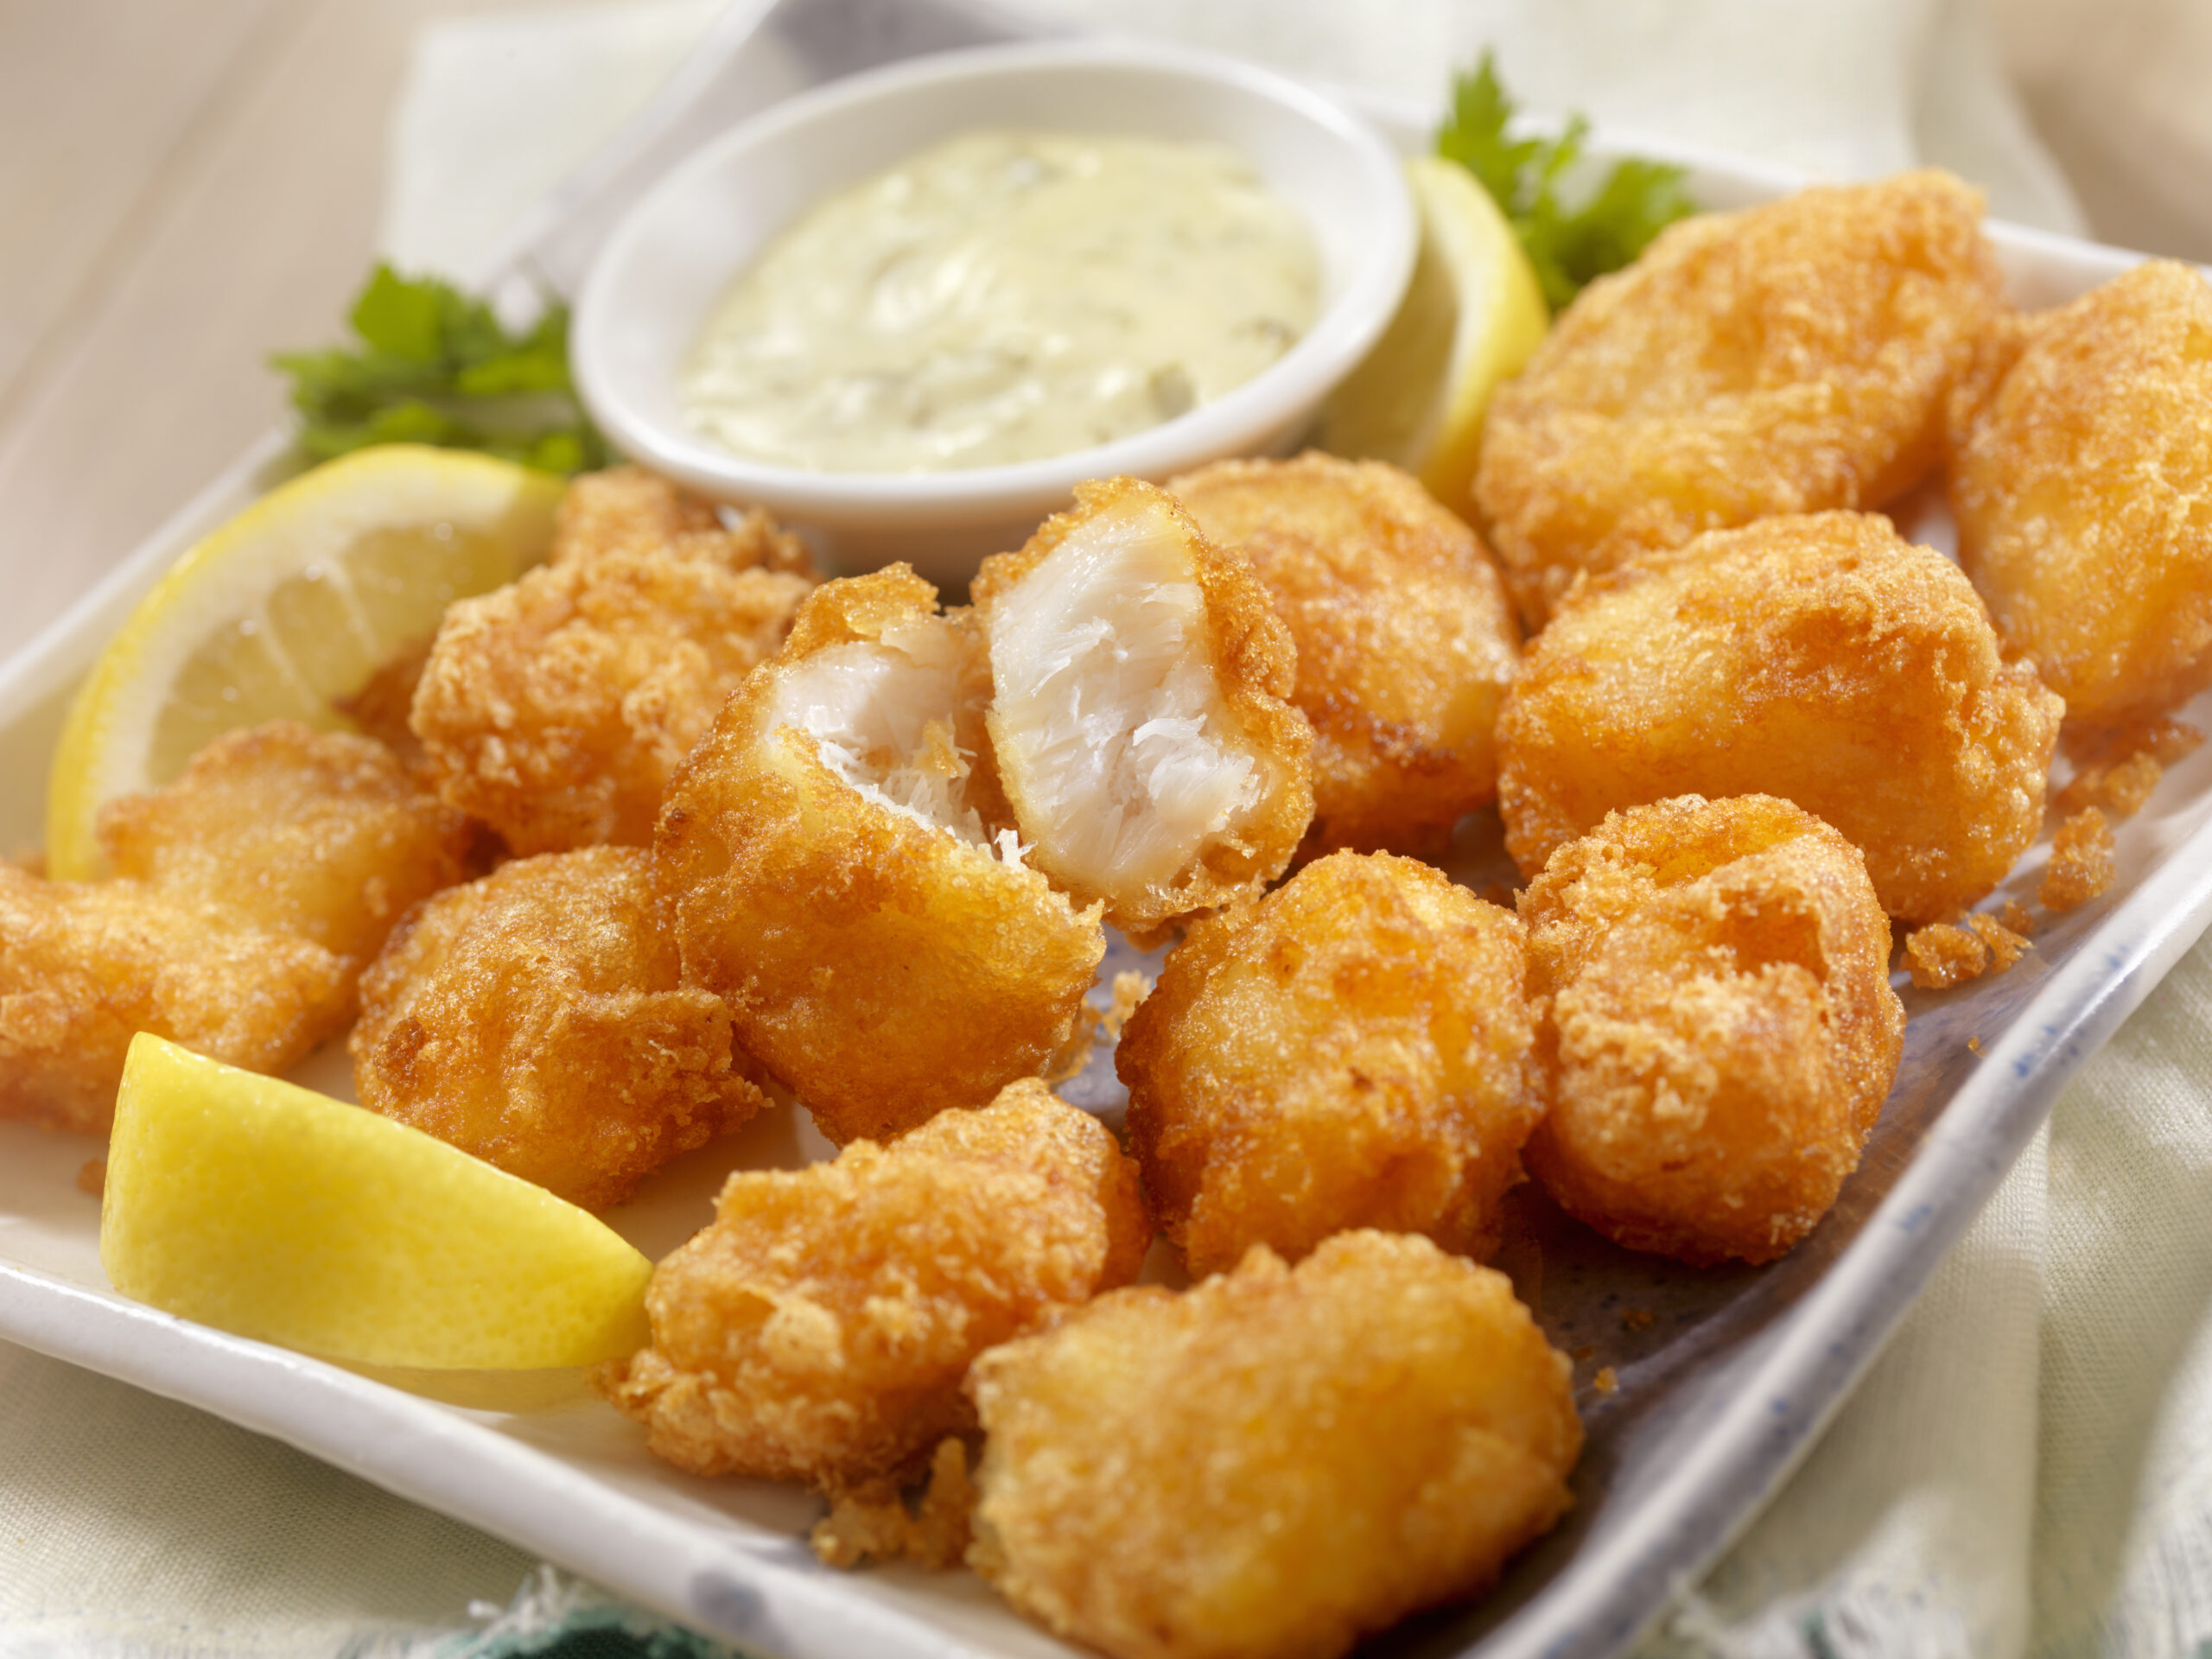 Beer Battered Fish Bites with Tarter Sauce and a Beer - Photographed on Hasselblad H3D2-39mb Camera